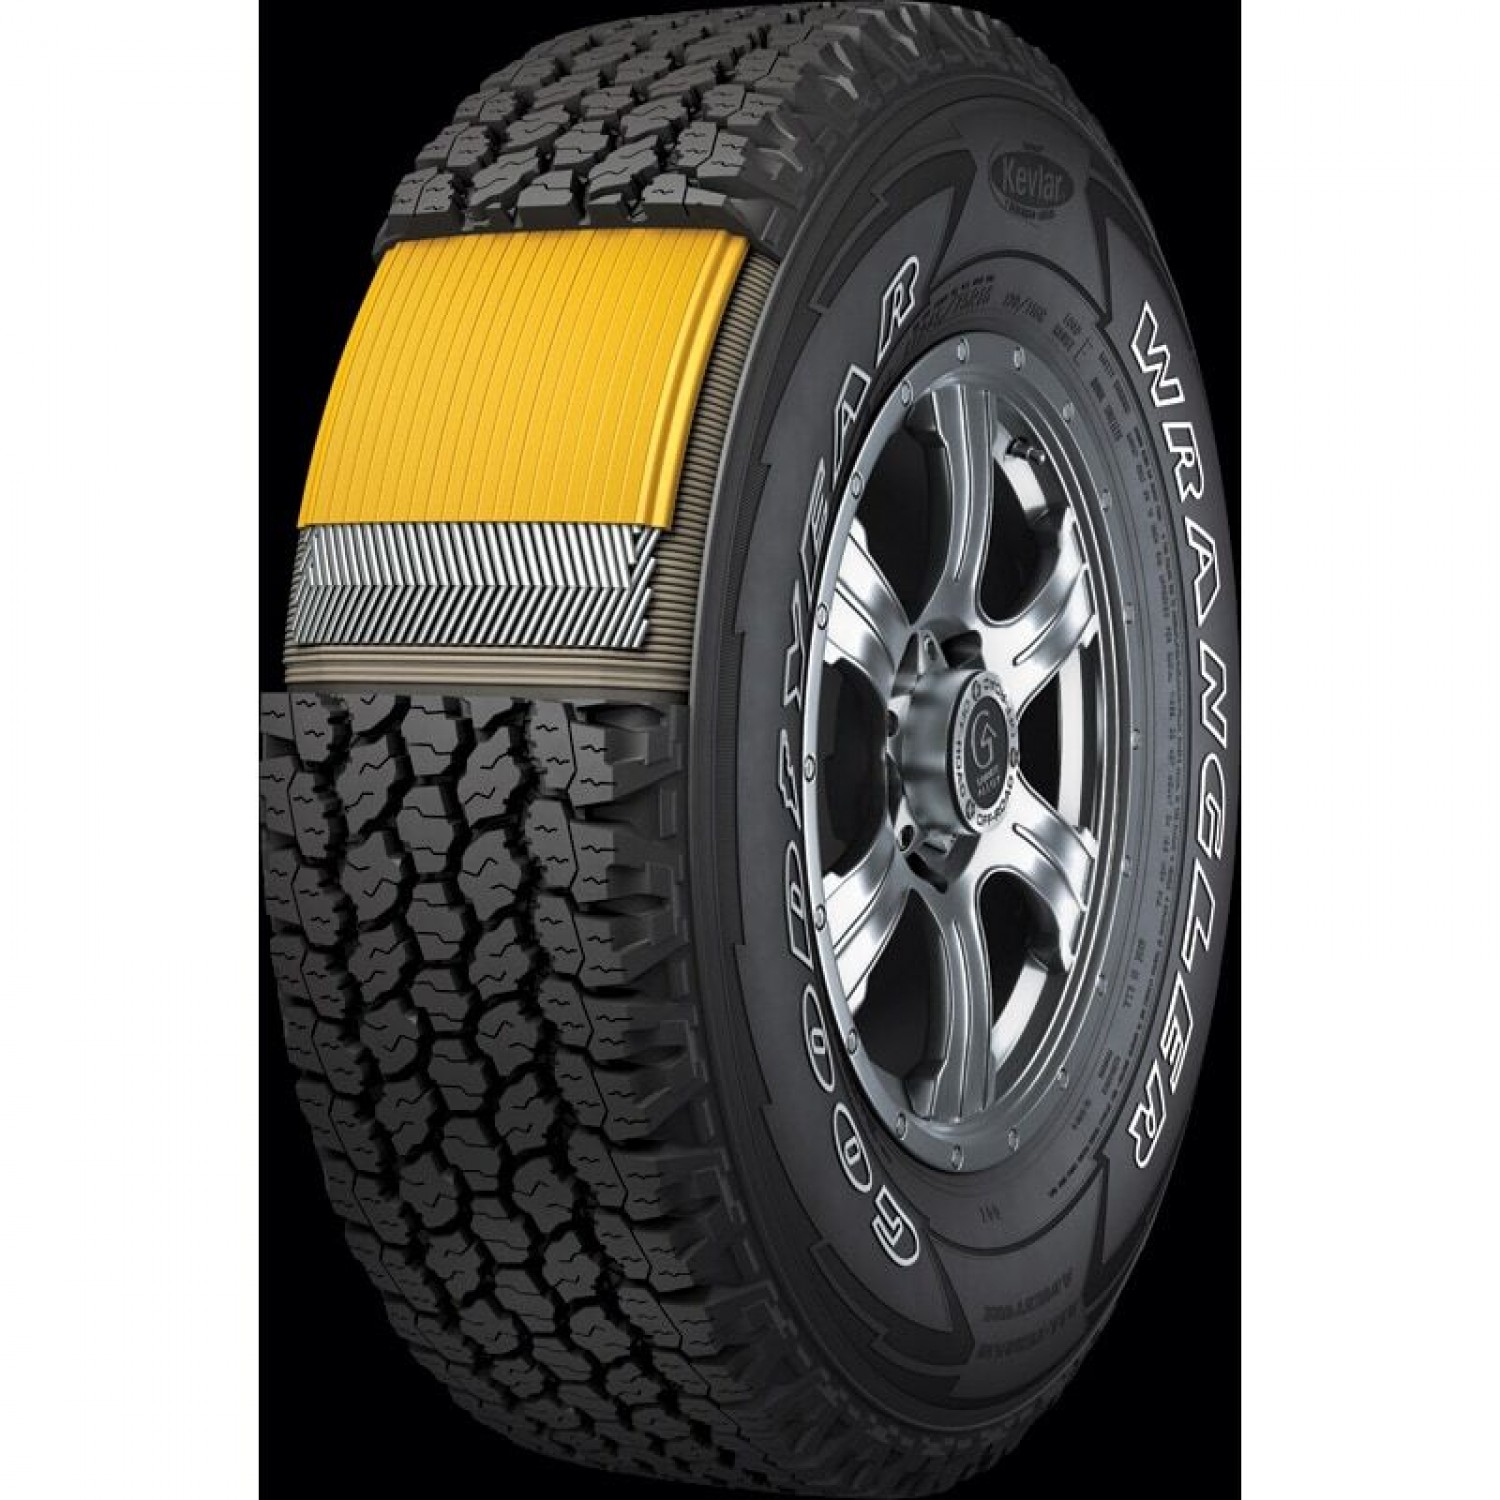 Goodyear Wrangler AT Adventure With Kevlar Outlined White Letters Tire (265/ 65R17 112T) vzn121231